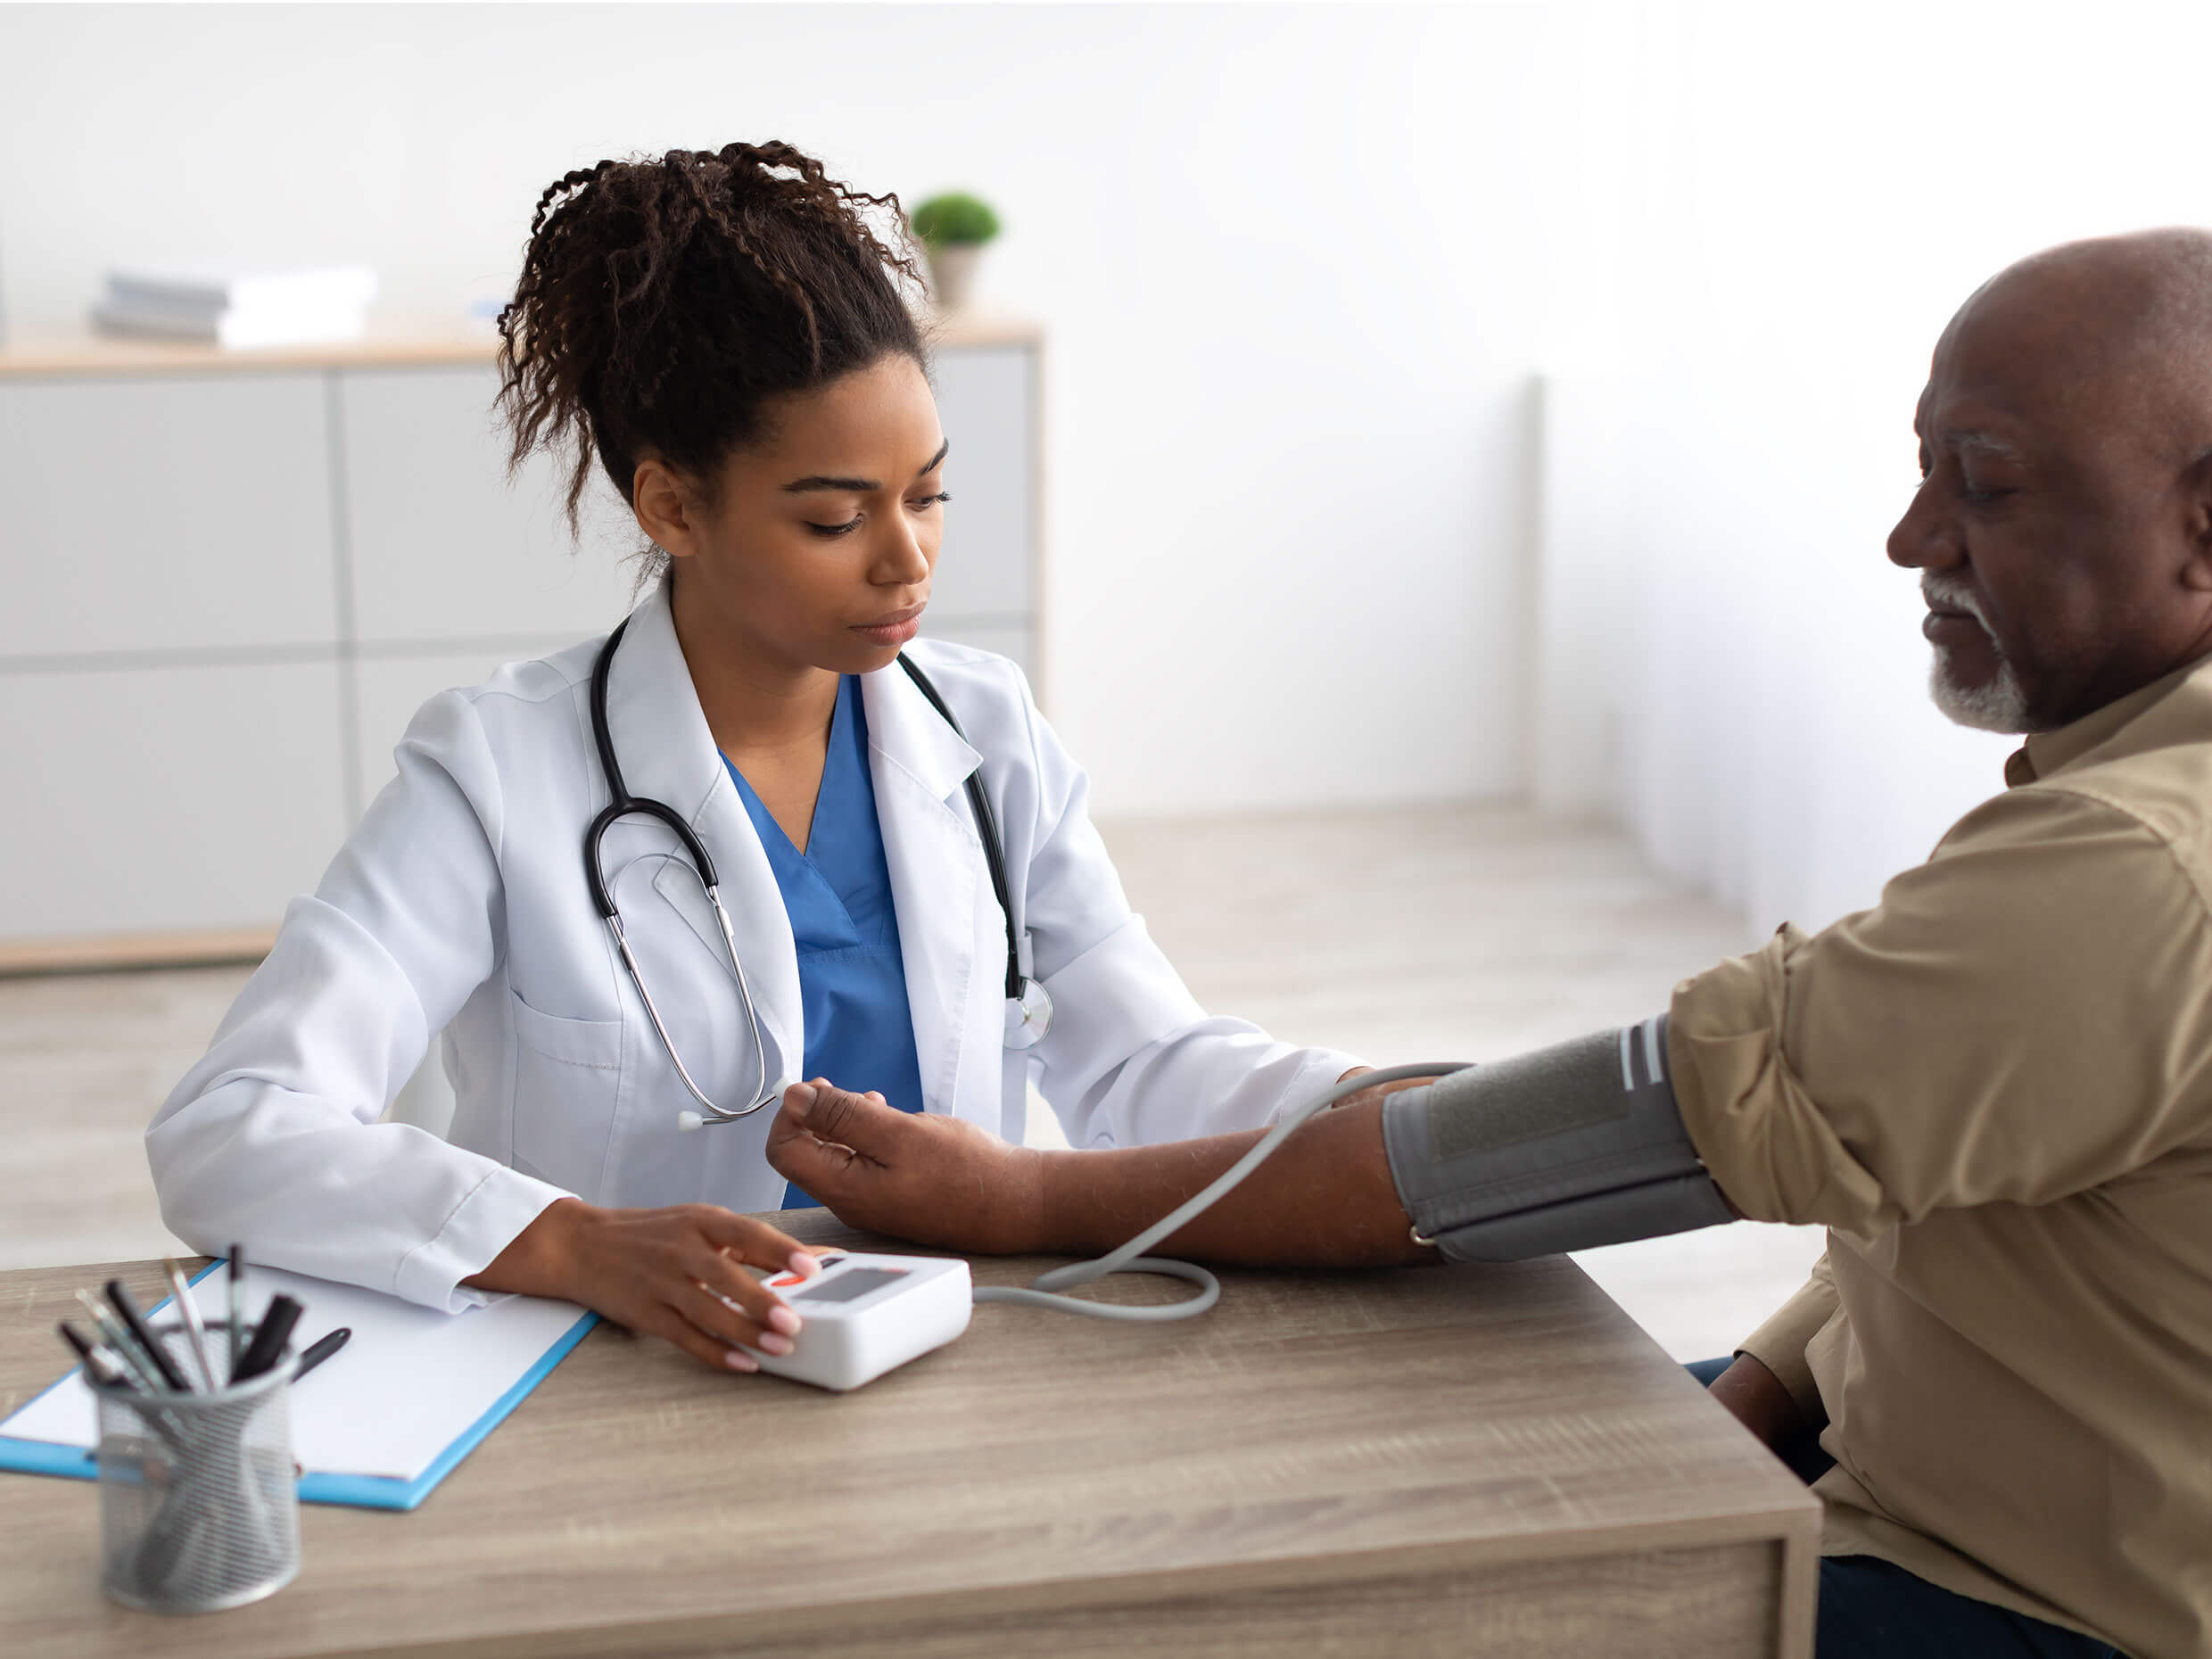 medical office administrator gathering billing information from a patient in a medical setting